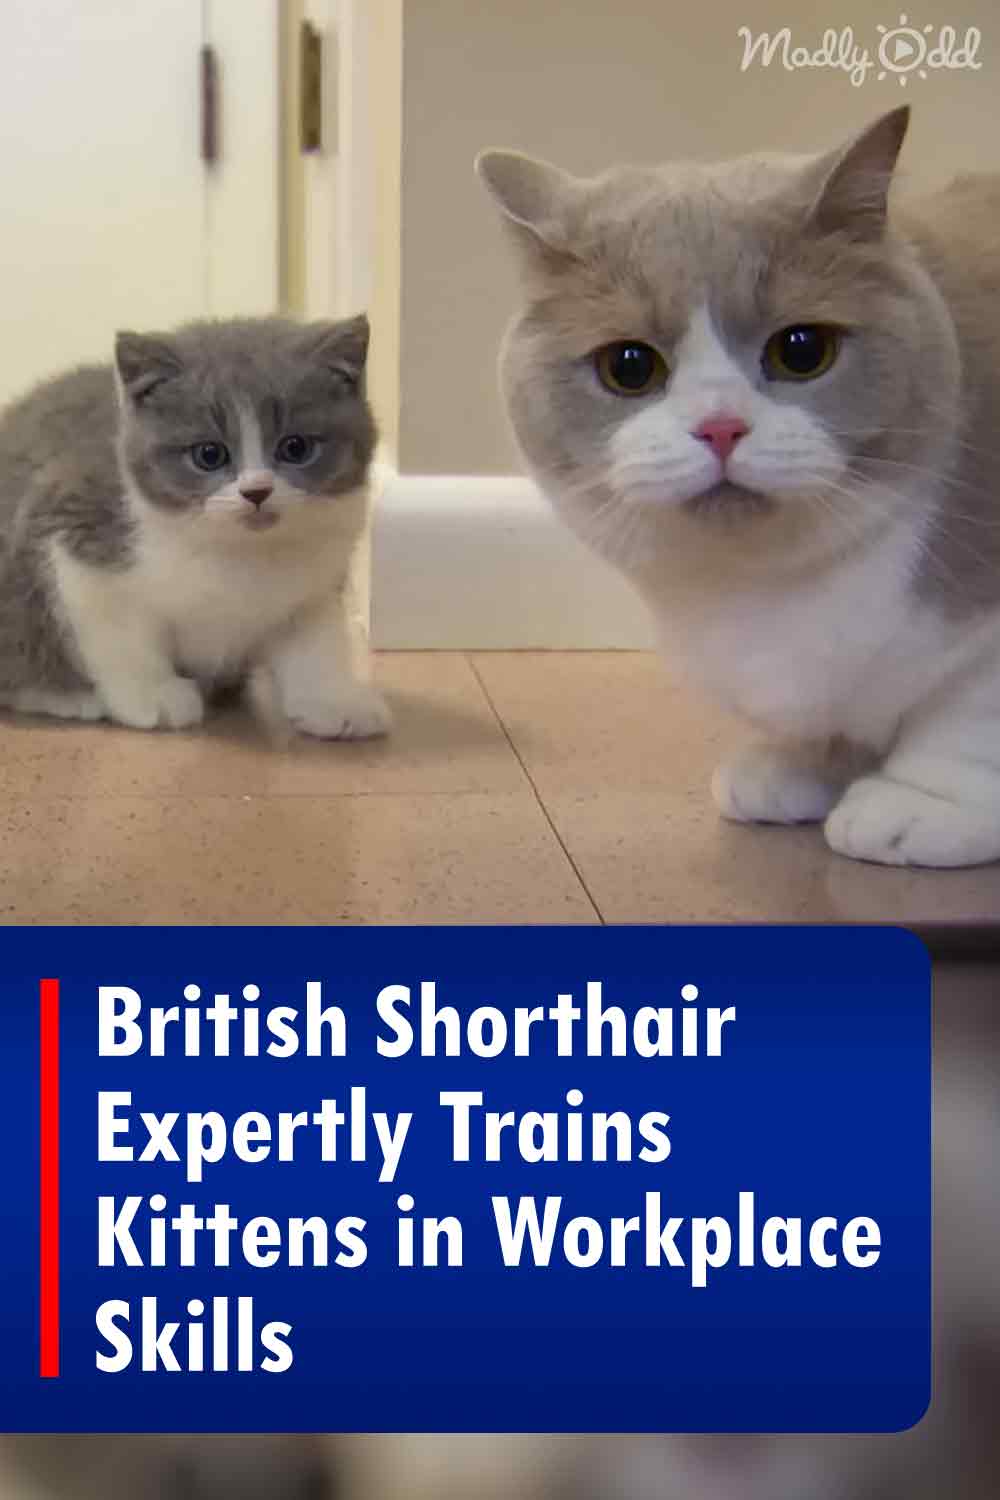 British Shorthair Expertly Trains Kittens in Workplace Skills